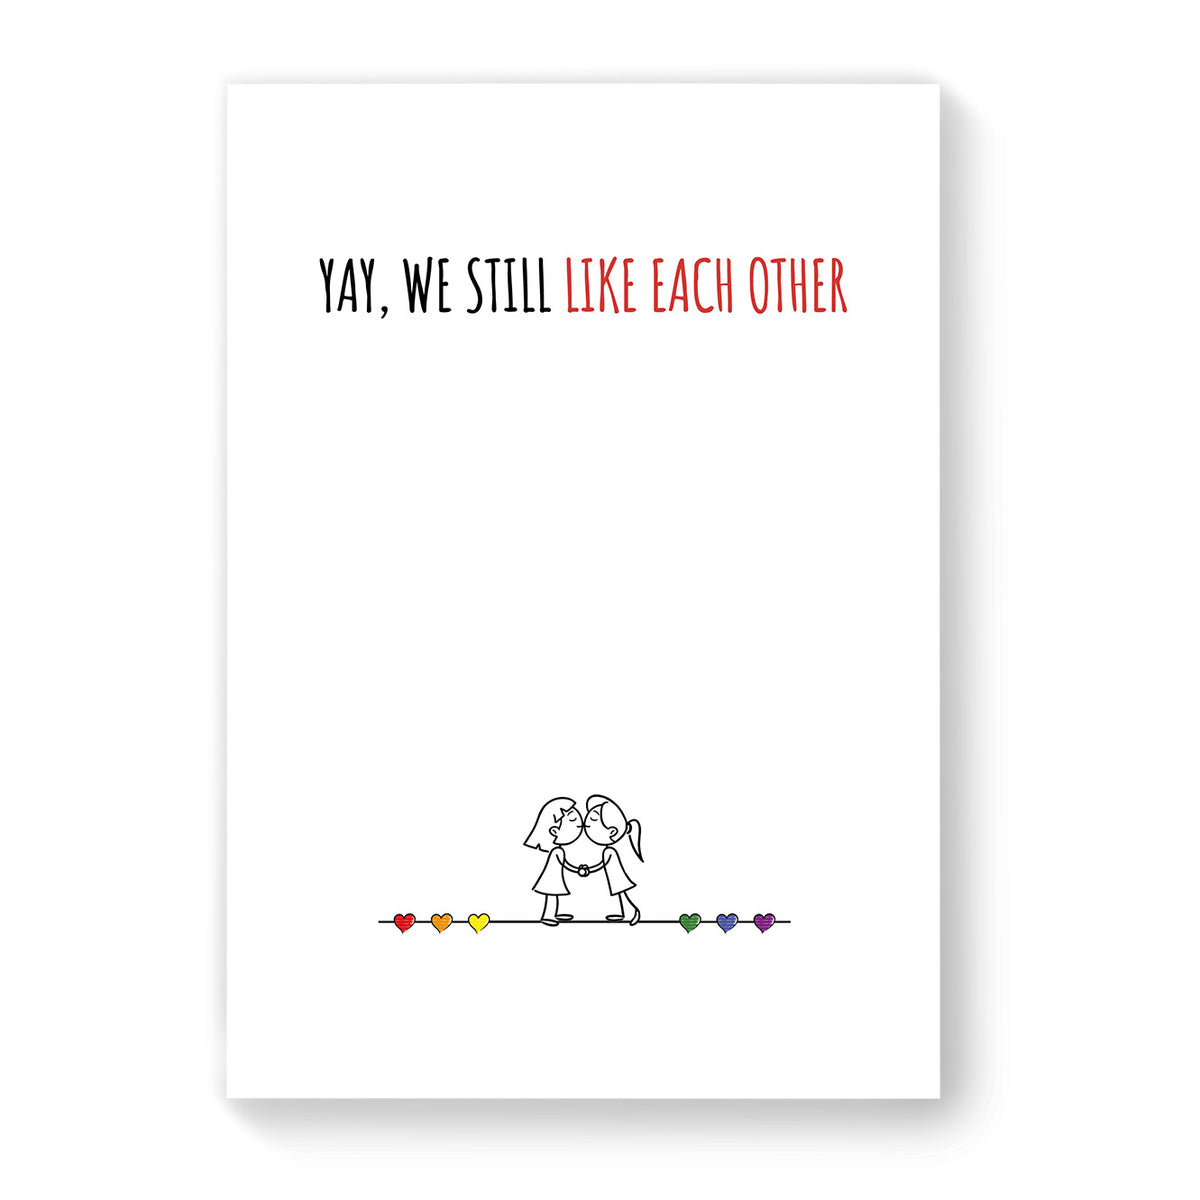 Yay, we still like each other - Lesbian Gay Couple Card - White Minimalist | Gift